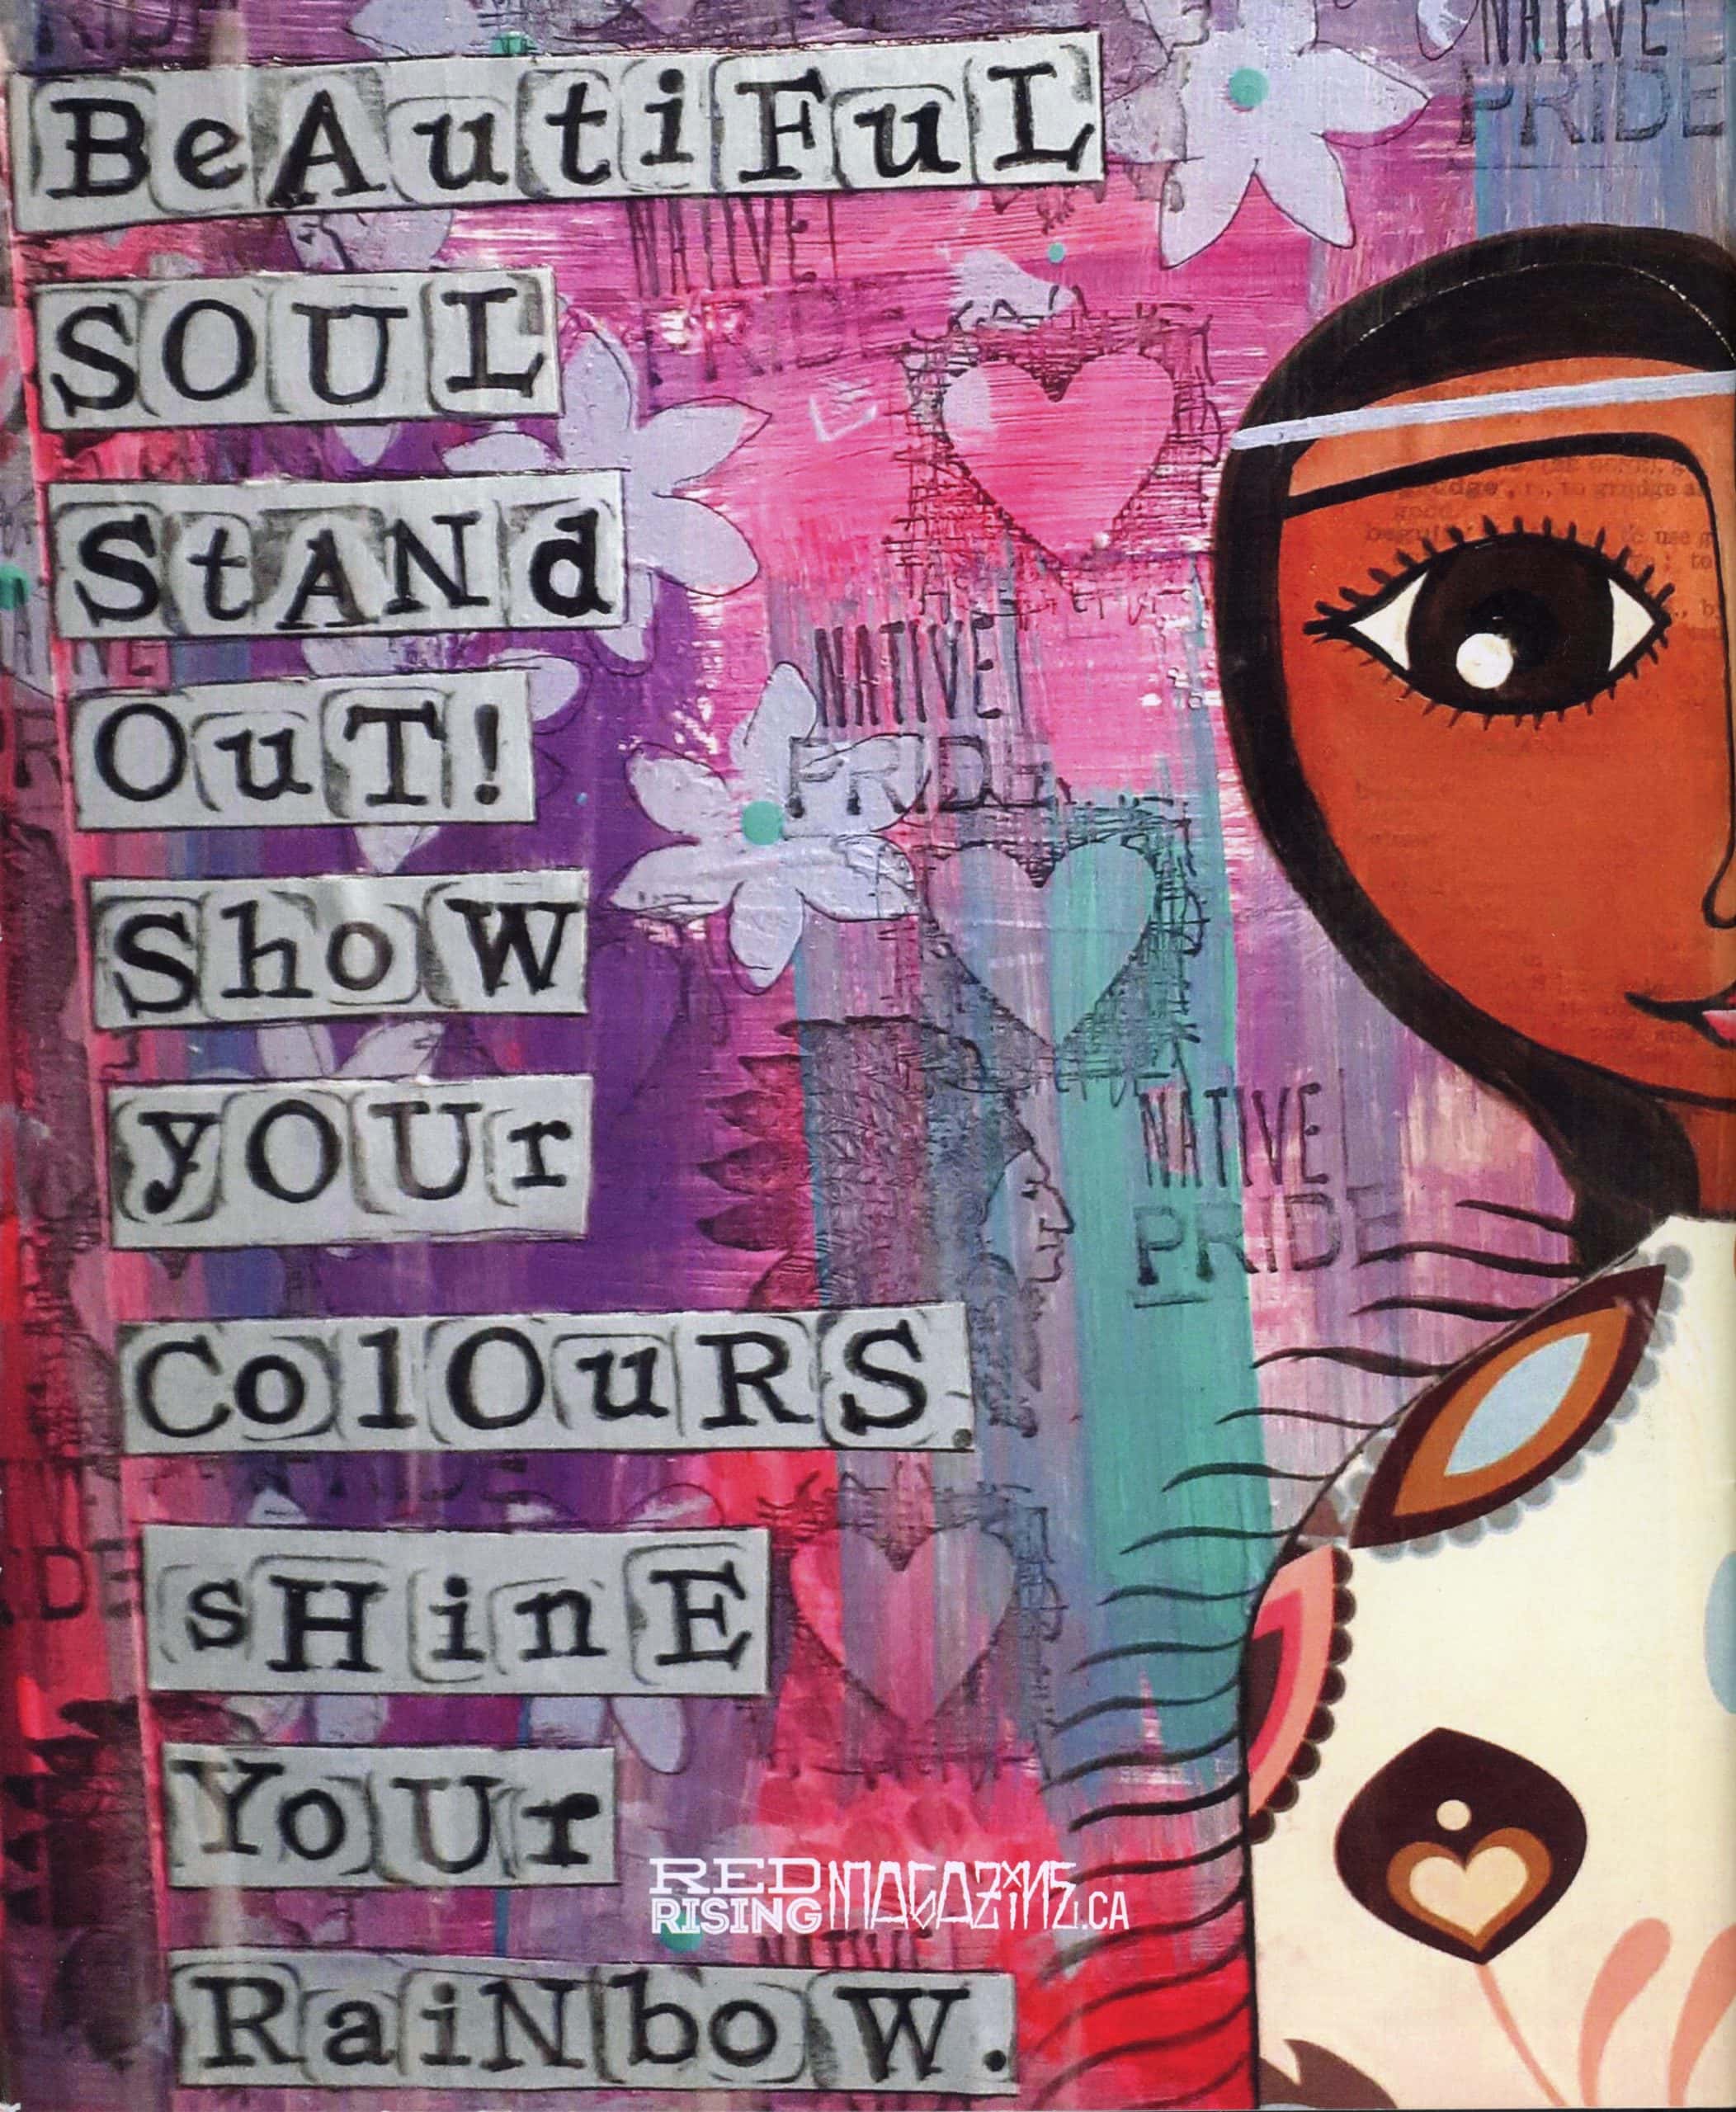 Painting on pink, purple and blue background with hearts and flowers and a smiling brown woman, alongside the text “Beautiful soul stand out! Show your colours shine your rainbow”